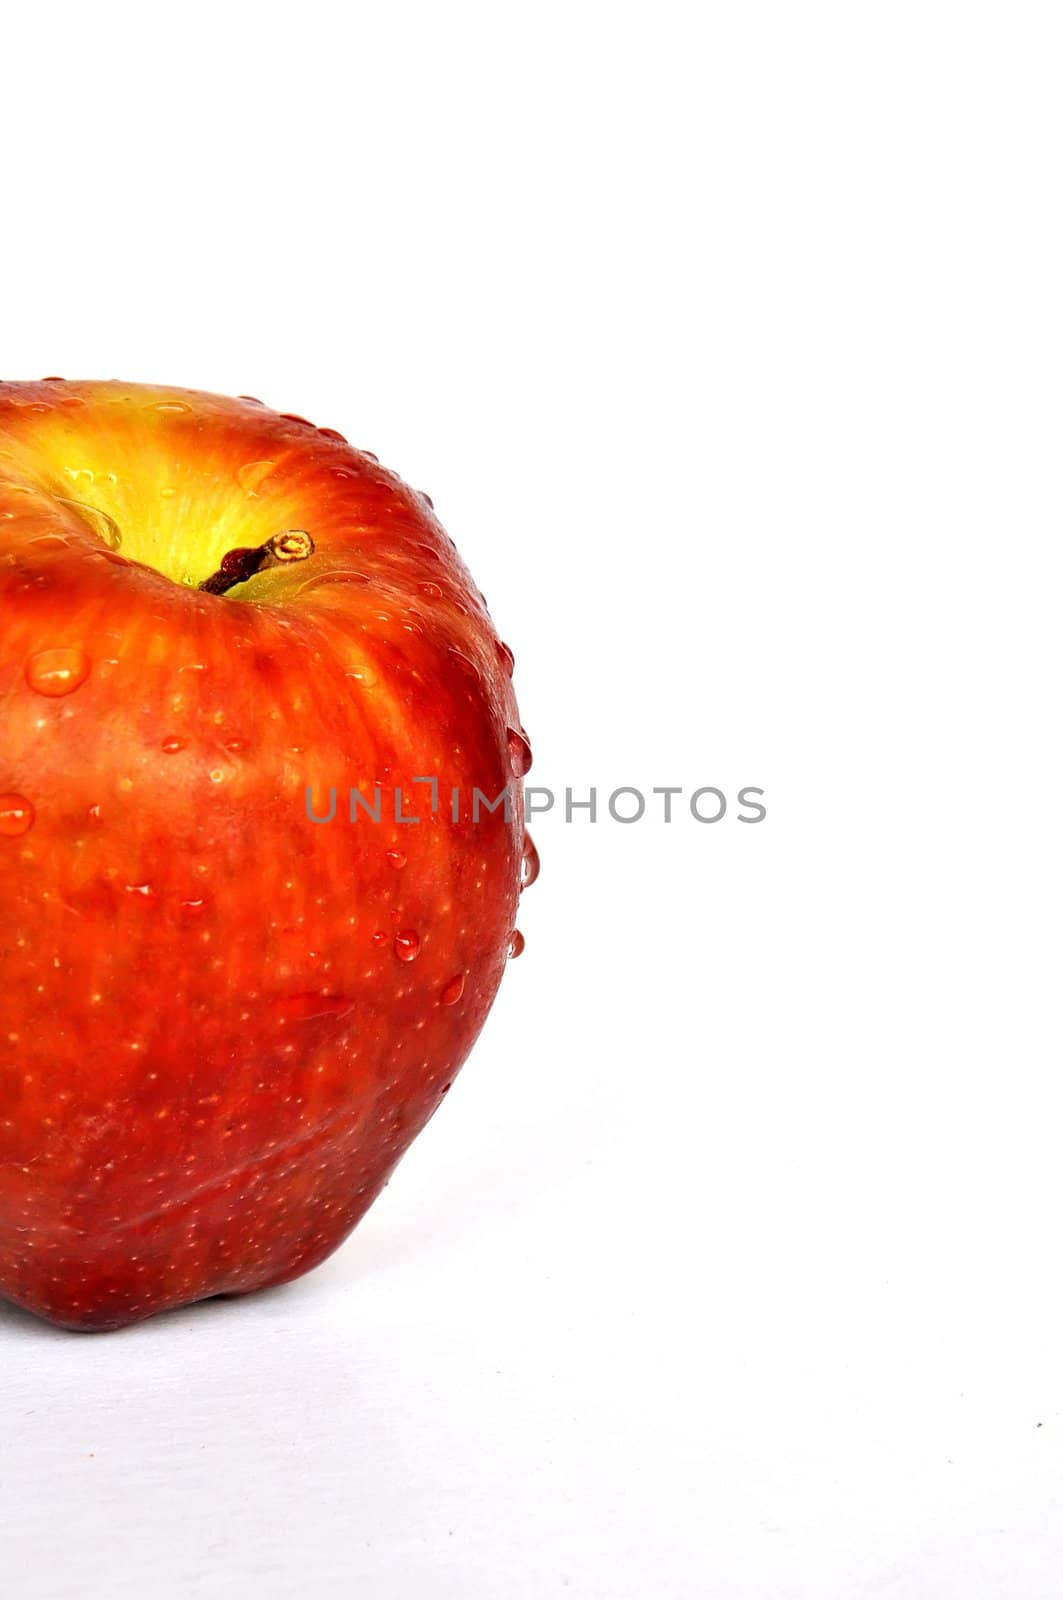 Red apple on white background 